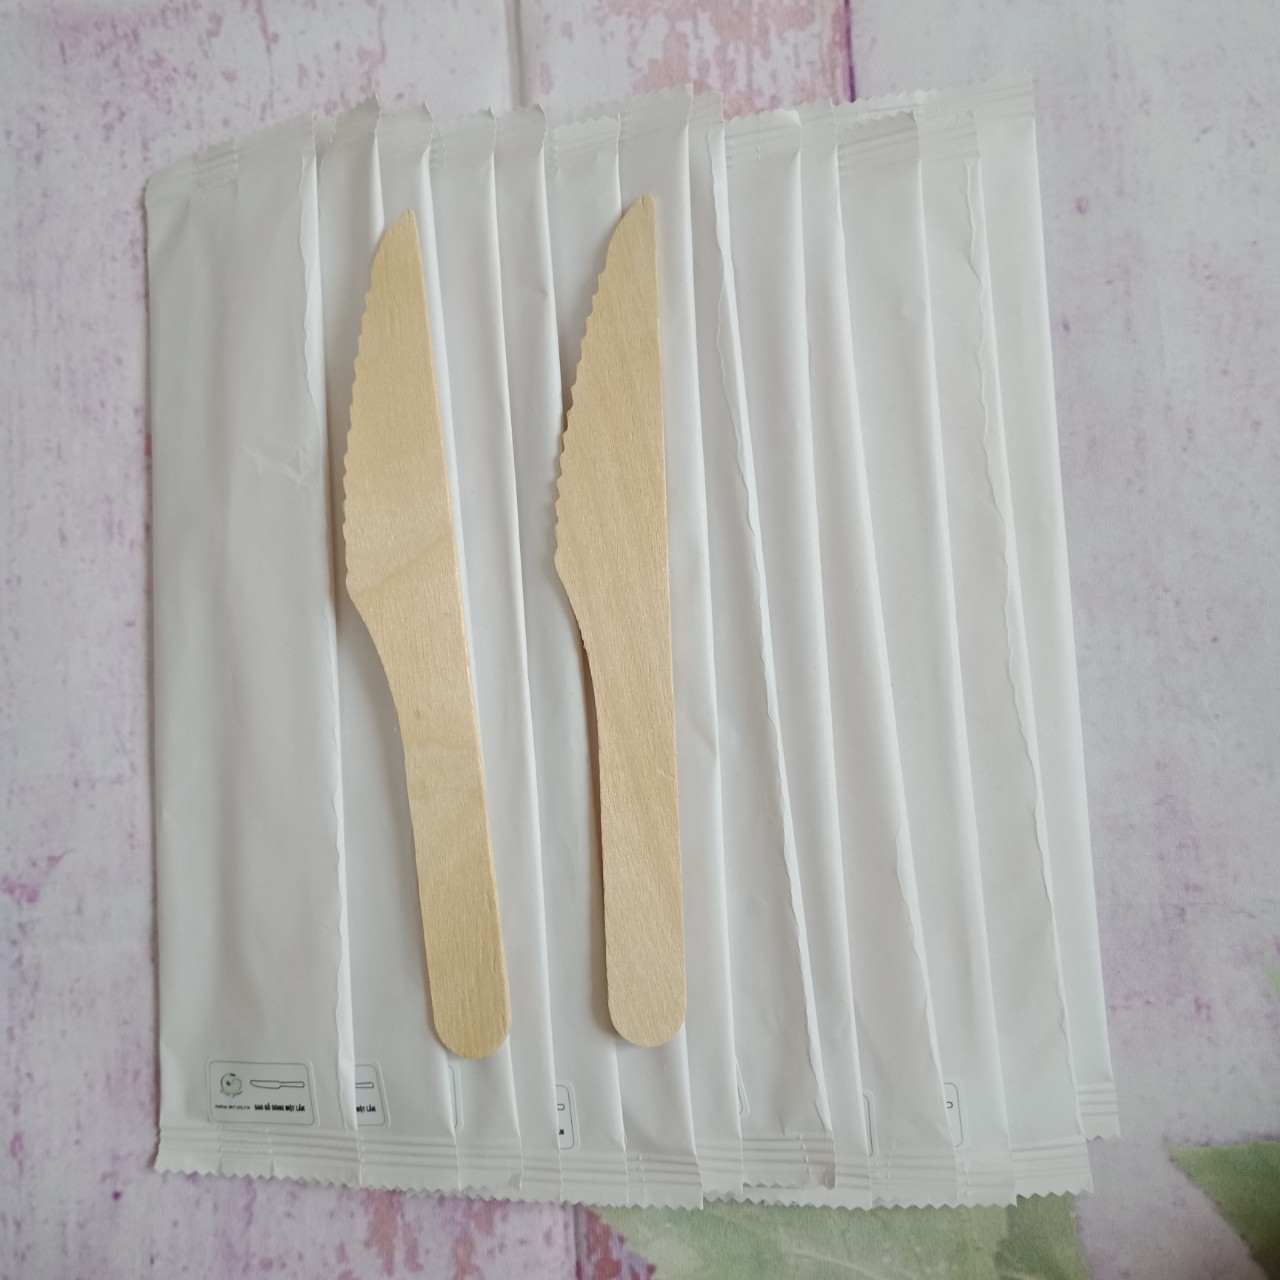 Disposable wooden knives paper wrapped